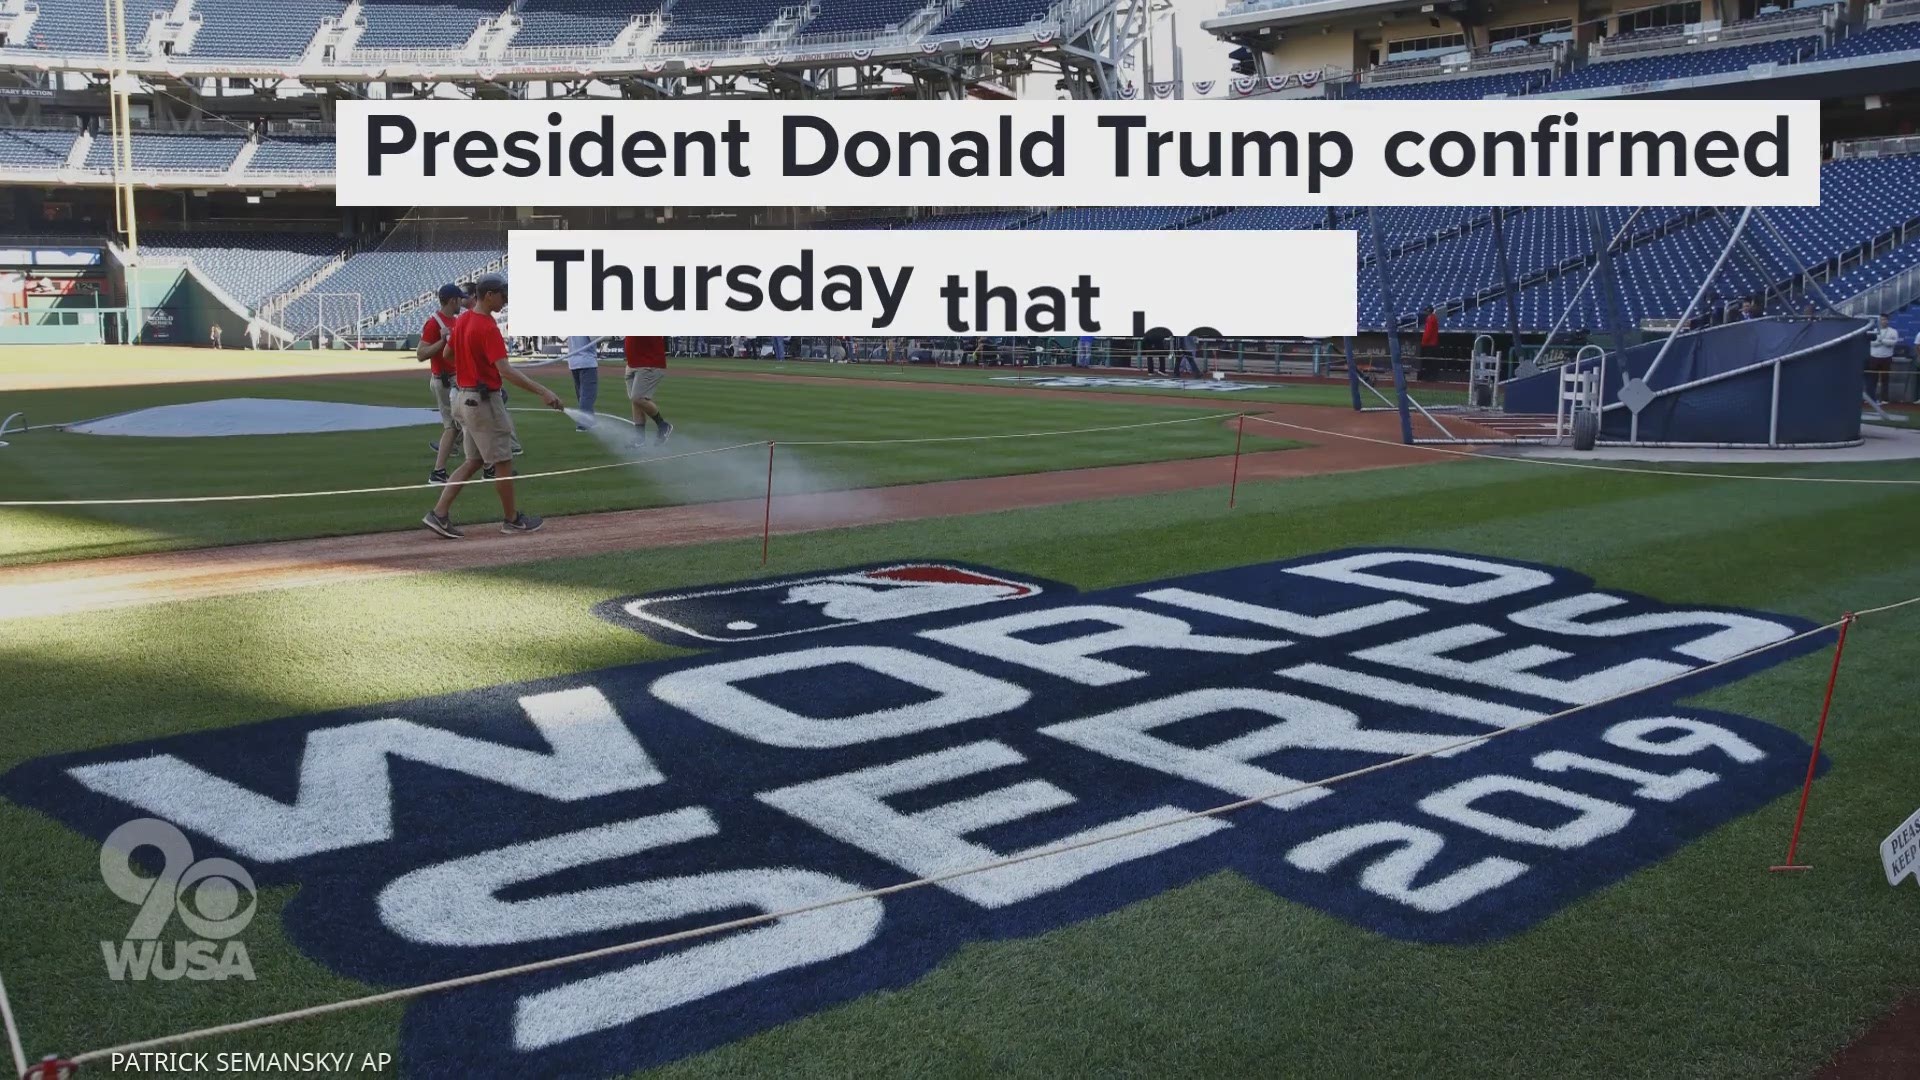 Trump attending World Series Game 5 wusa9